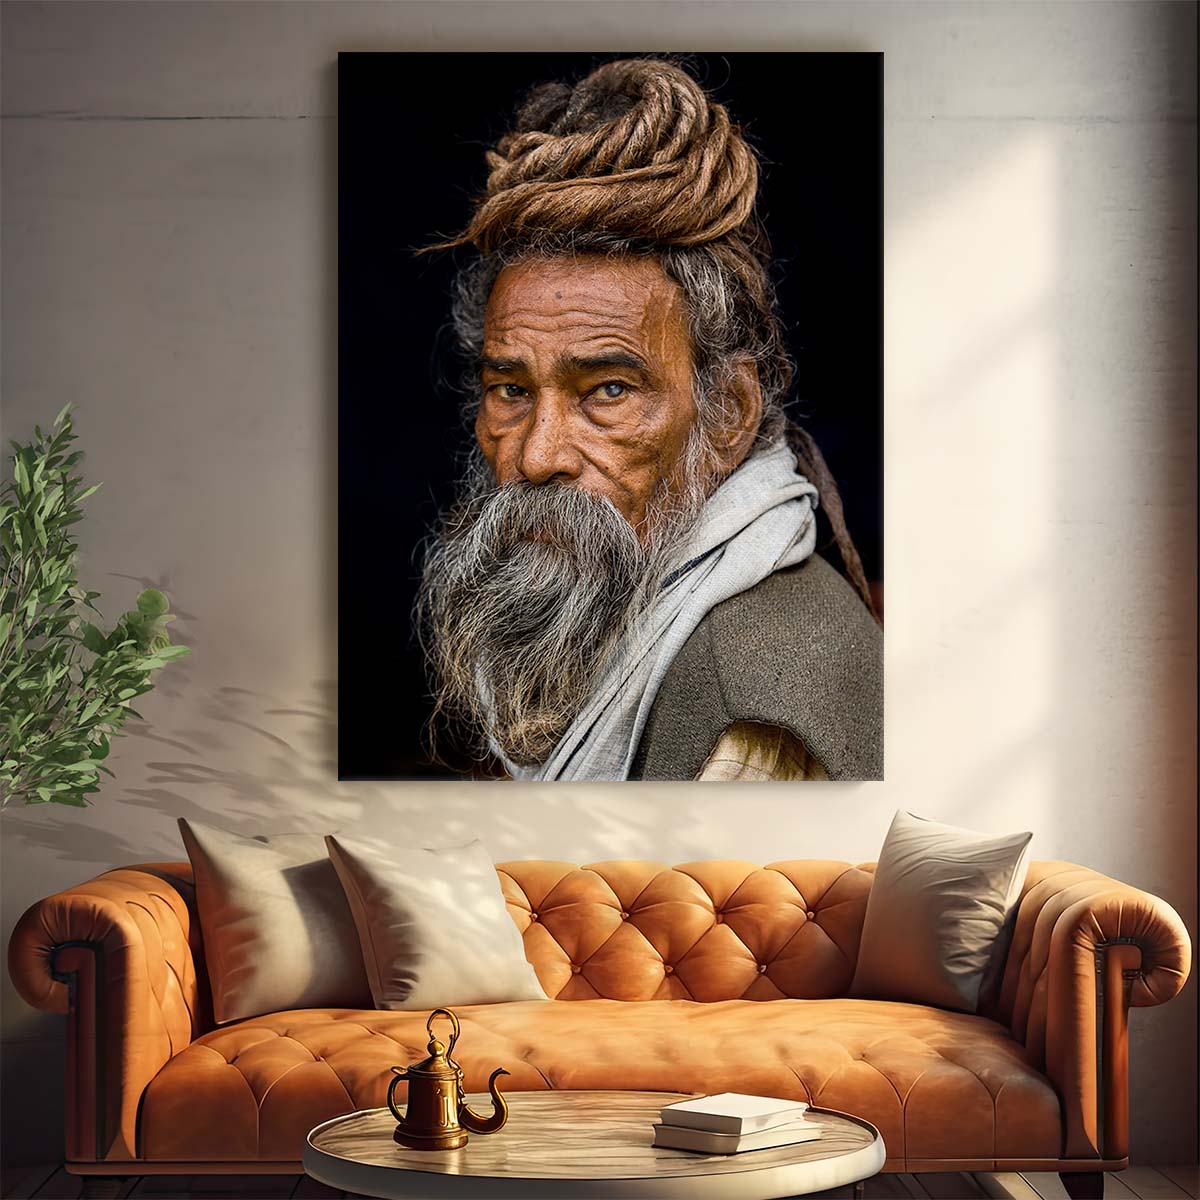 Spiritual Indian Sadhu Portrait Photography by Rakesh J.V by Luxuriance Designs, made in USA